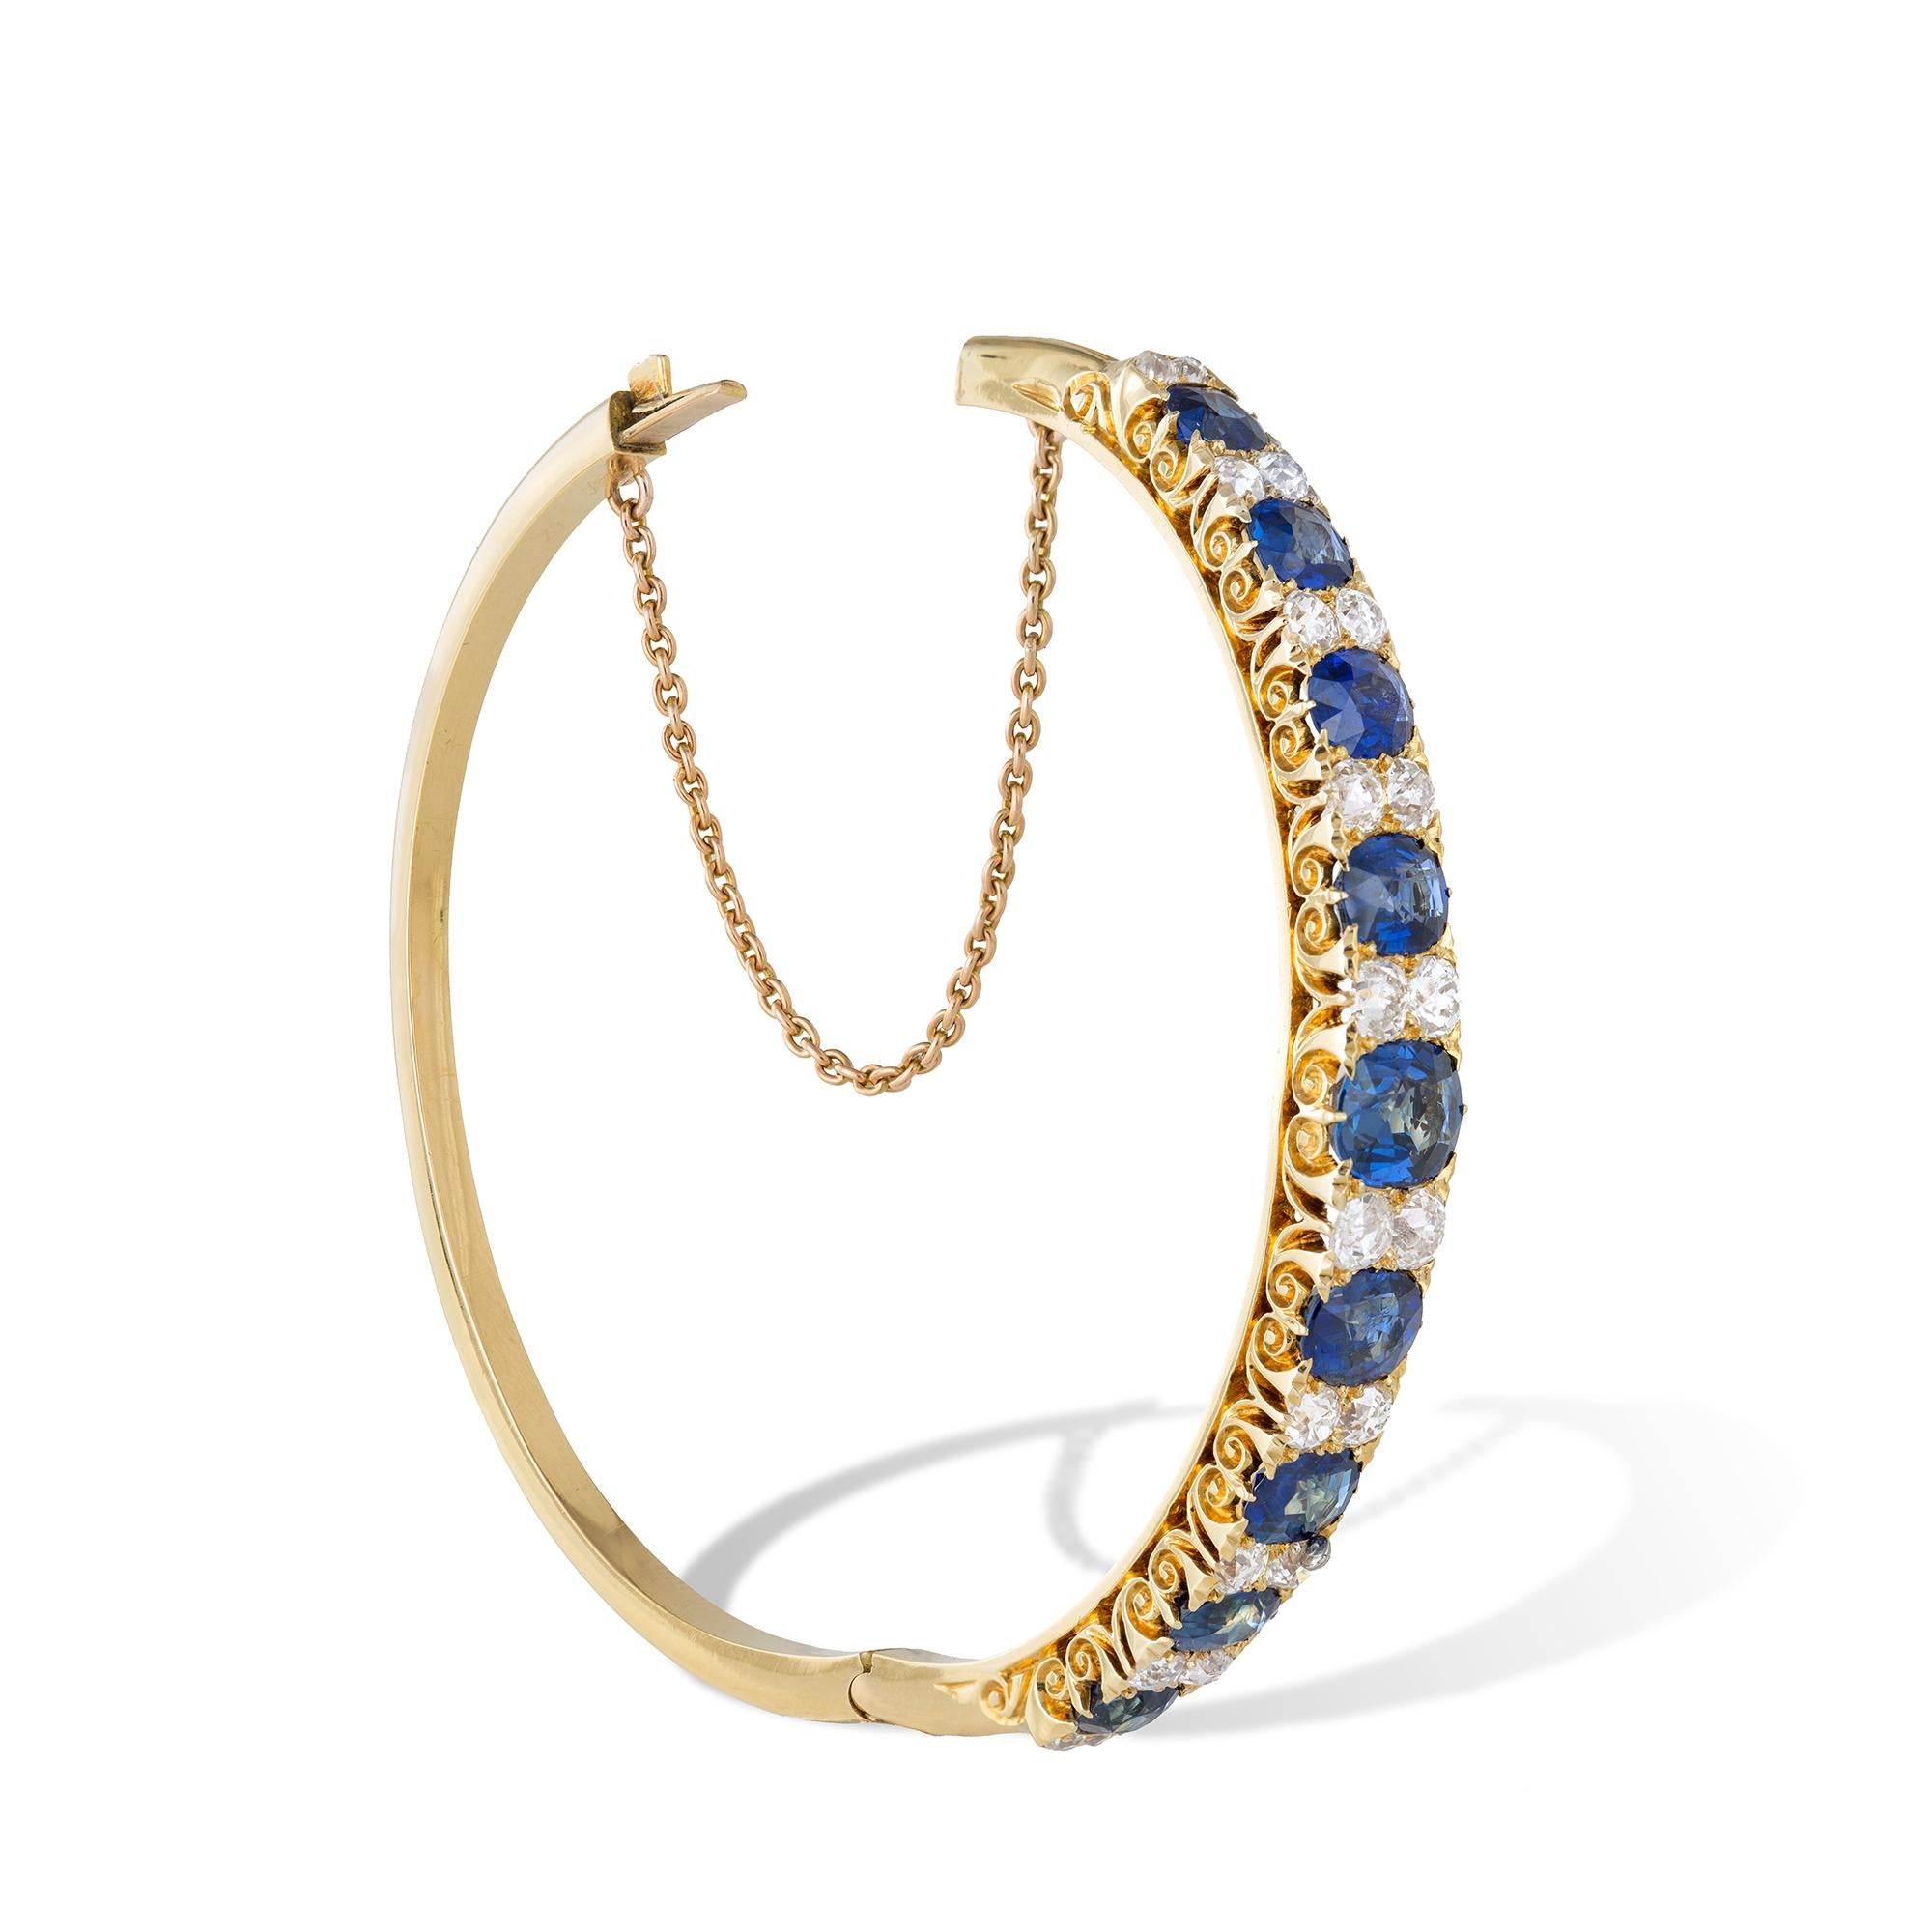 A Victorian sapphire and diamond carved half hoop bangle, the nine oval-cut faceted sapphires weighing approximately 6.8 carats alternatively set with ten vertical rows of two round old brilliant-cut diamonds in-between weighing an estimated total